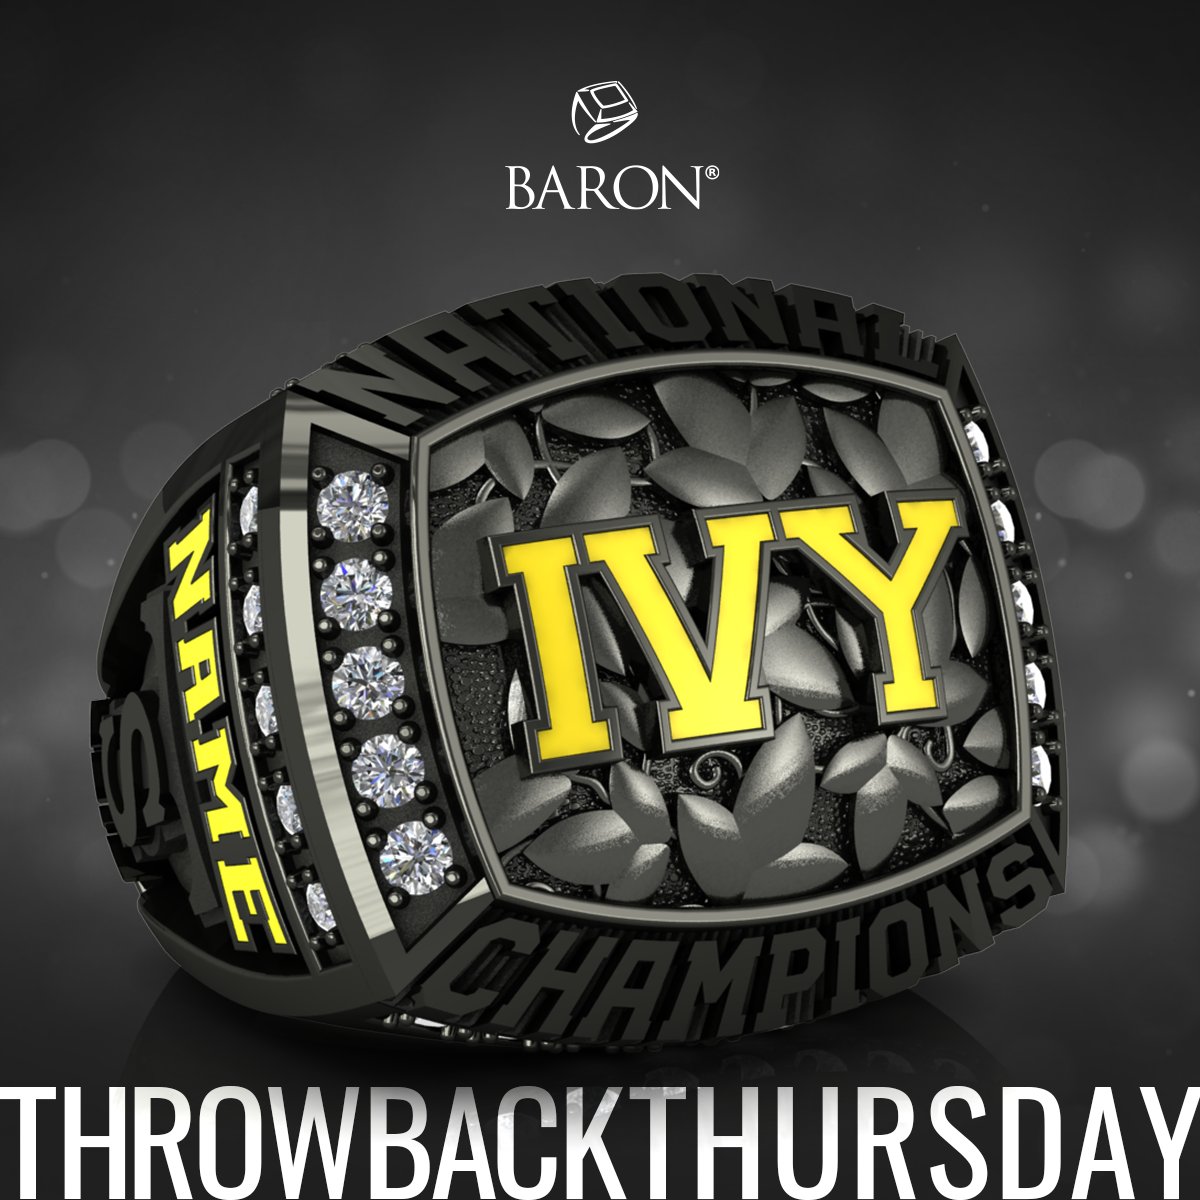 #throwbackthursday to the 2019 Ivy Cheer Championship Ring 💍
#baronrings #baron2021 #baronchampionshiprings #championship #rings  #throwback #ivycheer #cheerleading #cheerring #cheerchampions